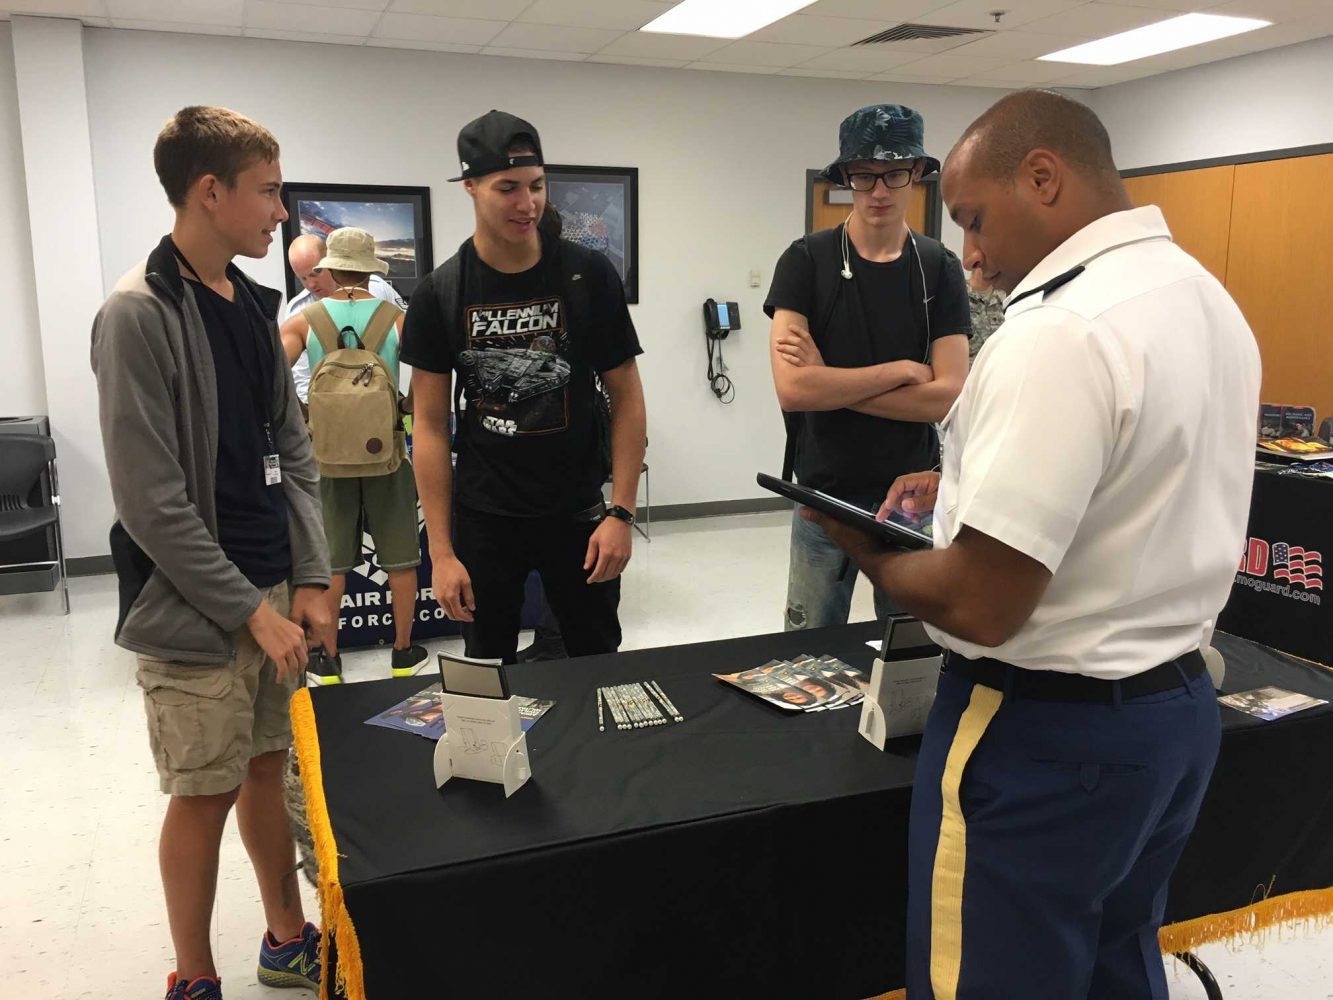 Career speakers, Armed Forces recruiters meet with students during Pirate Connections